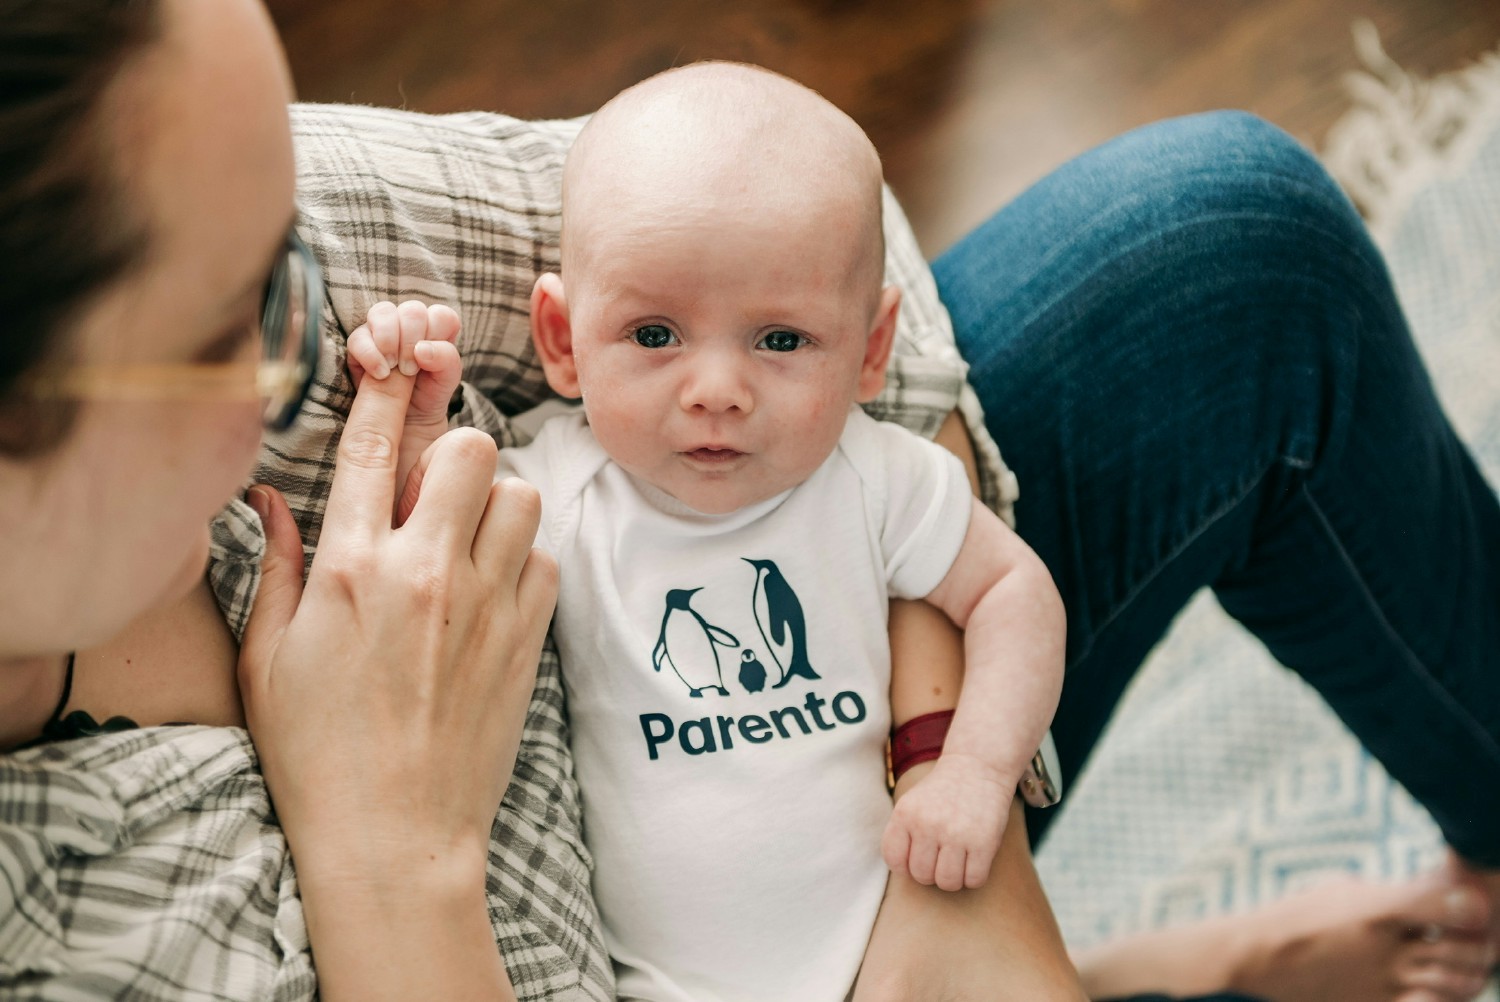 A cute Parento baby in his penguin gear! Parento supports all workplaces through paid parental leave insurance. 